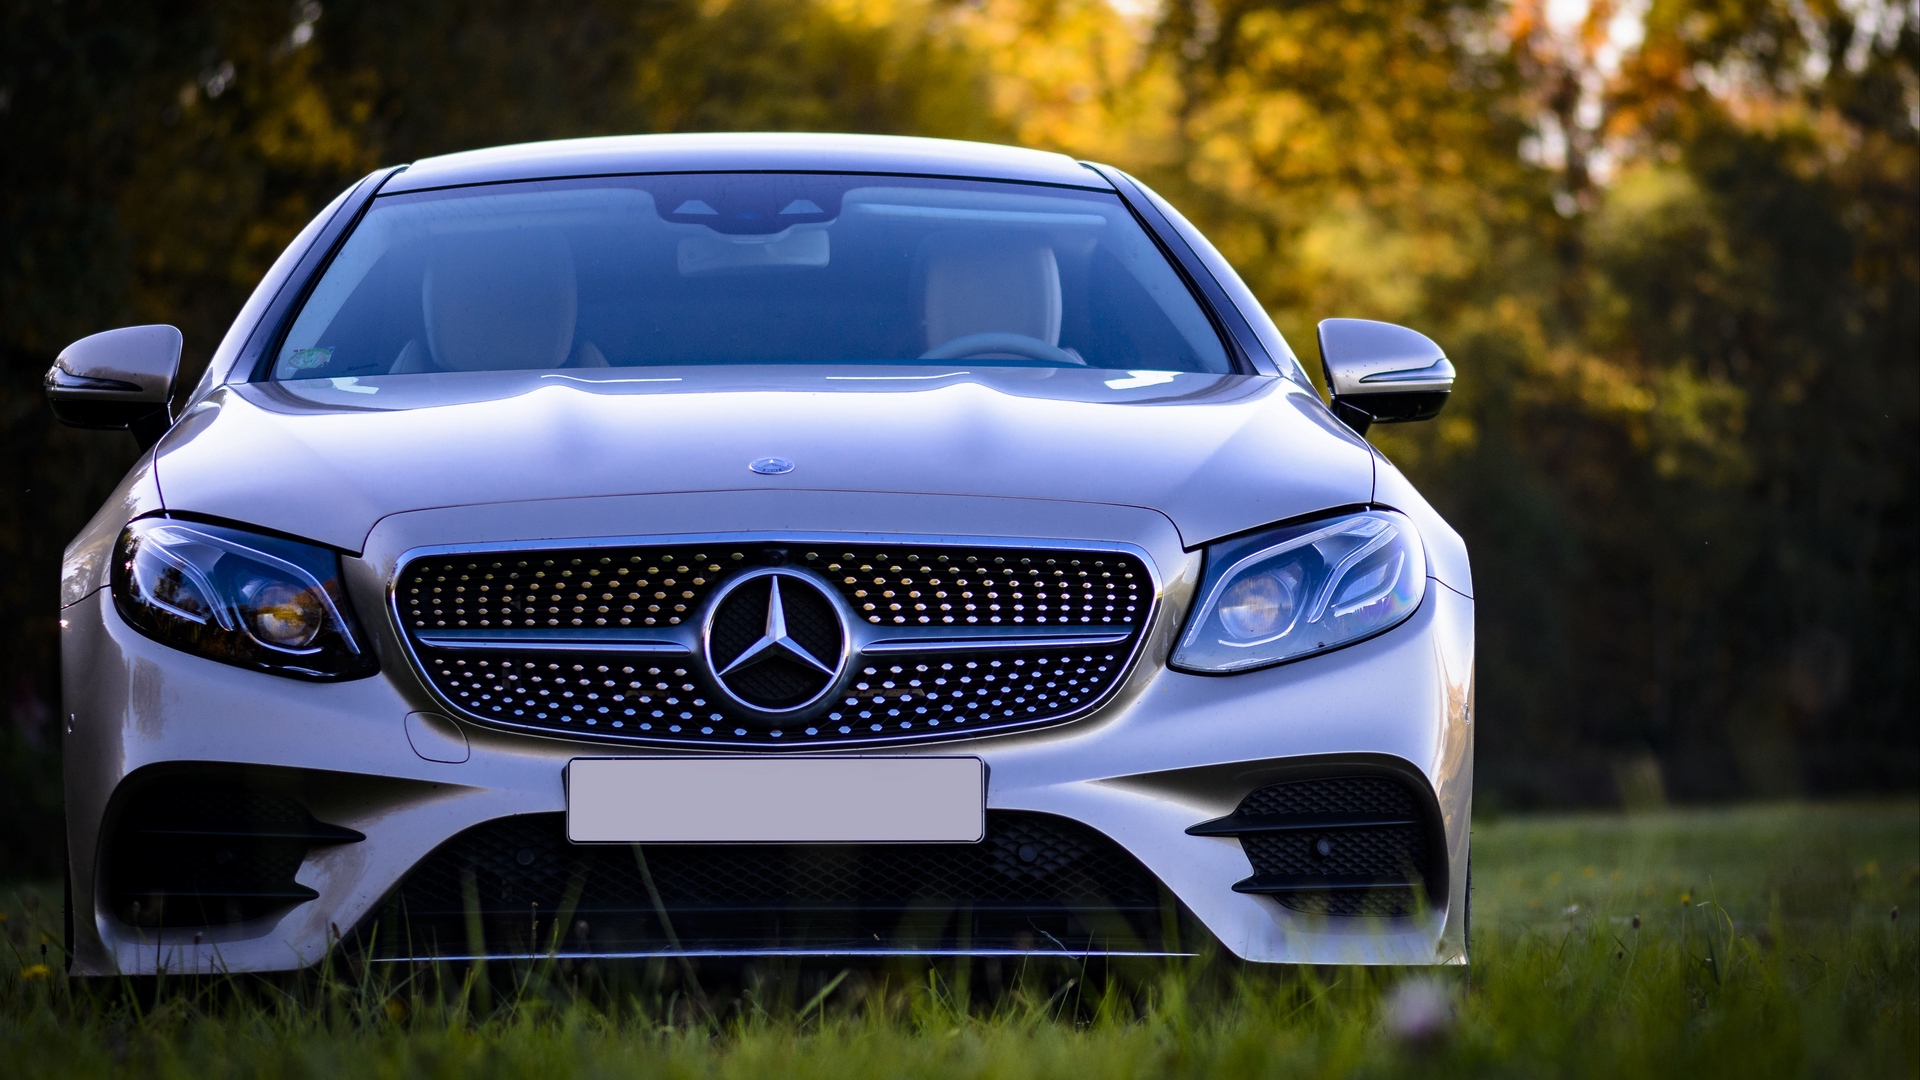 Tips to consider while choosing engine oil for your luxury car